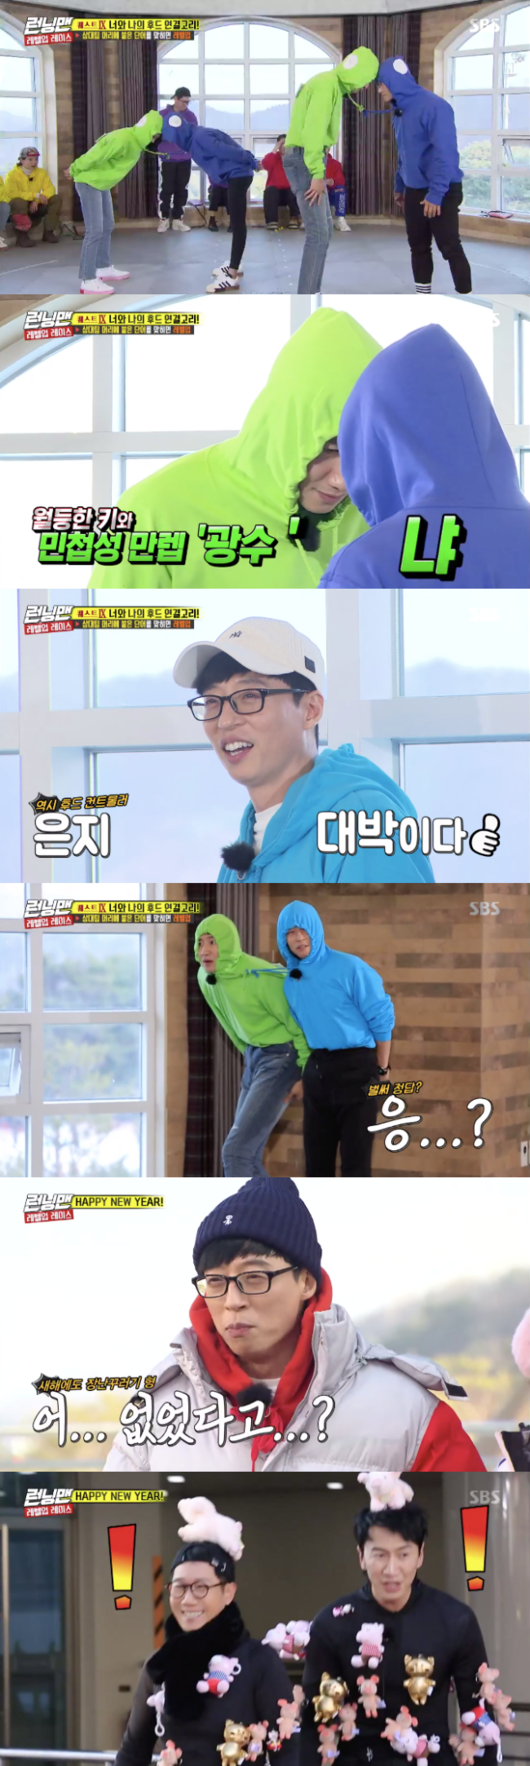 Running Man Yo Jae-Suk and Lee Kwang-soo are also the best entertainment couple.In the first Running Man in New Year, Yoo Jae-Suk and Lee Kwang-soo boast perfect honey chemistry.Two people who teased each other like a grudge, and gave a big smile to the game. The activities of the official Running Man chemistry fairies continued in New Year.In the SBS entertainment program Running Man broadcasted on the afternoon of the 6th, RPG Game was held as the first race of New Year.The members of Running Man will be working on a level-up project through Game until they become Manreb, adding fun with various games from groups to couples and solo exhibitions.Above all, it was Yo Jae-Suk and Lee Kwang-soo, who were also glowing in the New Year.Lee Kwang-soo appeared in the opening with Ji Suk-jin as the first penalty for Running Man New Year.The members laughed at the appearance of Lee Kwang-soo wearing a black chewy costume and a pig in the pig, and added fun to each other.Lee Kwang-soo, who is teased, was more fun because he was a regular material of Running Man.As he hosted the game, Lee Kwang-soo and Yoo Jae-Suks Chemie also shone once again.Yoo Jae-Suk and Lee Kwang-soo, checking each other, added laughter with dirty play: The perfect chemistry that gave laughter in the entertainment.It was Yoo Jae-Suk and Lee Kwang-soo who got to face each other in the couple Race, who were playing with A Pink members.The two had to stay with the straps of their hoodie shirts, face to face, and then hit the letters on each others heads.As the game began, the two carefully stood head to head on their sides instead of a fierce fight.Yoo Jae-Suk and Lee Kwang-soo did not come out of the way, but they laughed at the head and carefully turned the room.The two men who played the dirty play carefully were the perfect radiant chemistry in the entertainment.Even when I decided to set the level downgrade member, two people remained and laughed.Yoo Jae-Suk and Lee Kwang-soo, who showed Kimi like a jinx in Running Man and were betrayed by the same team.This year, it was also the performance of the chemi makers who will be responsible for Running Man.SBS broadcast screen capture